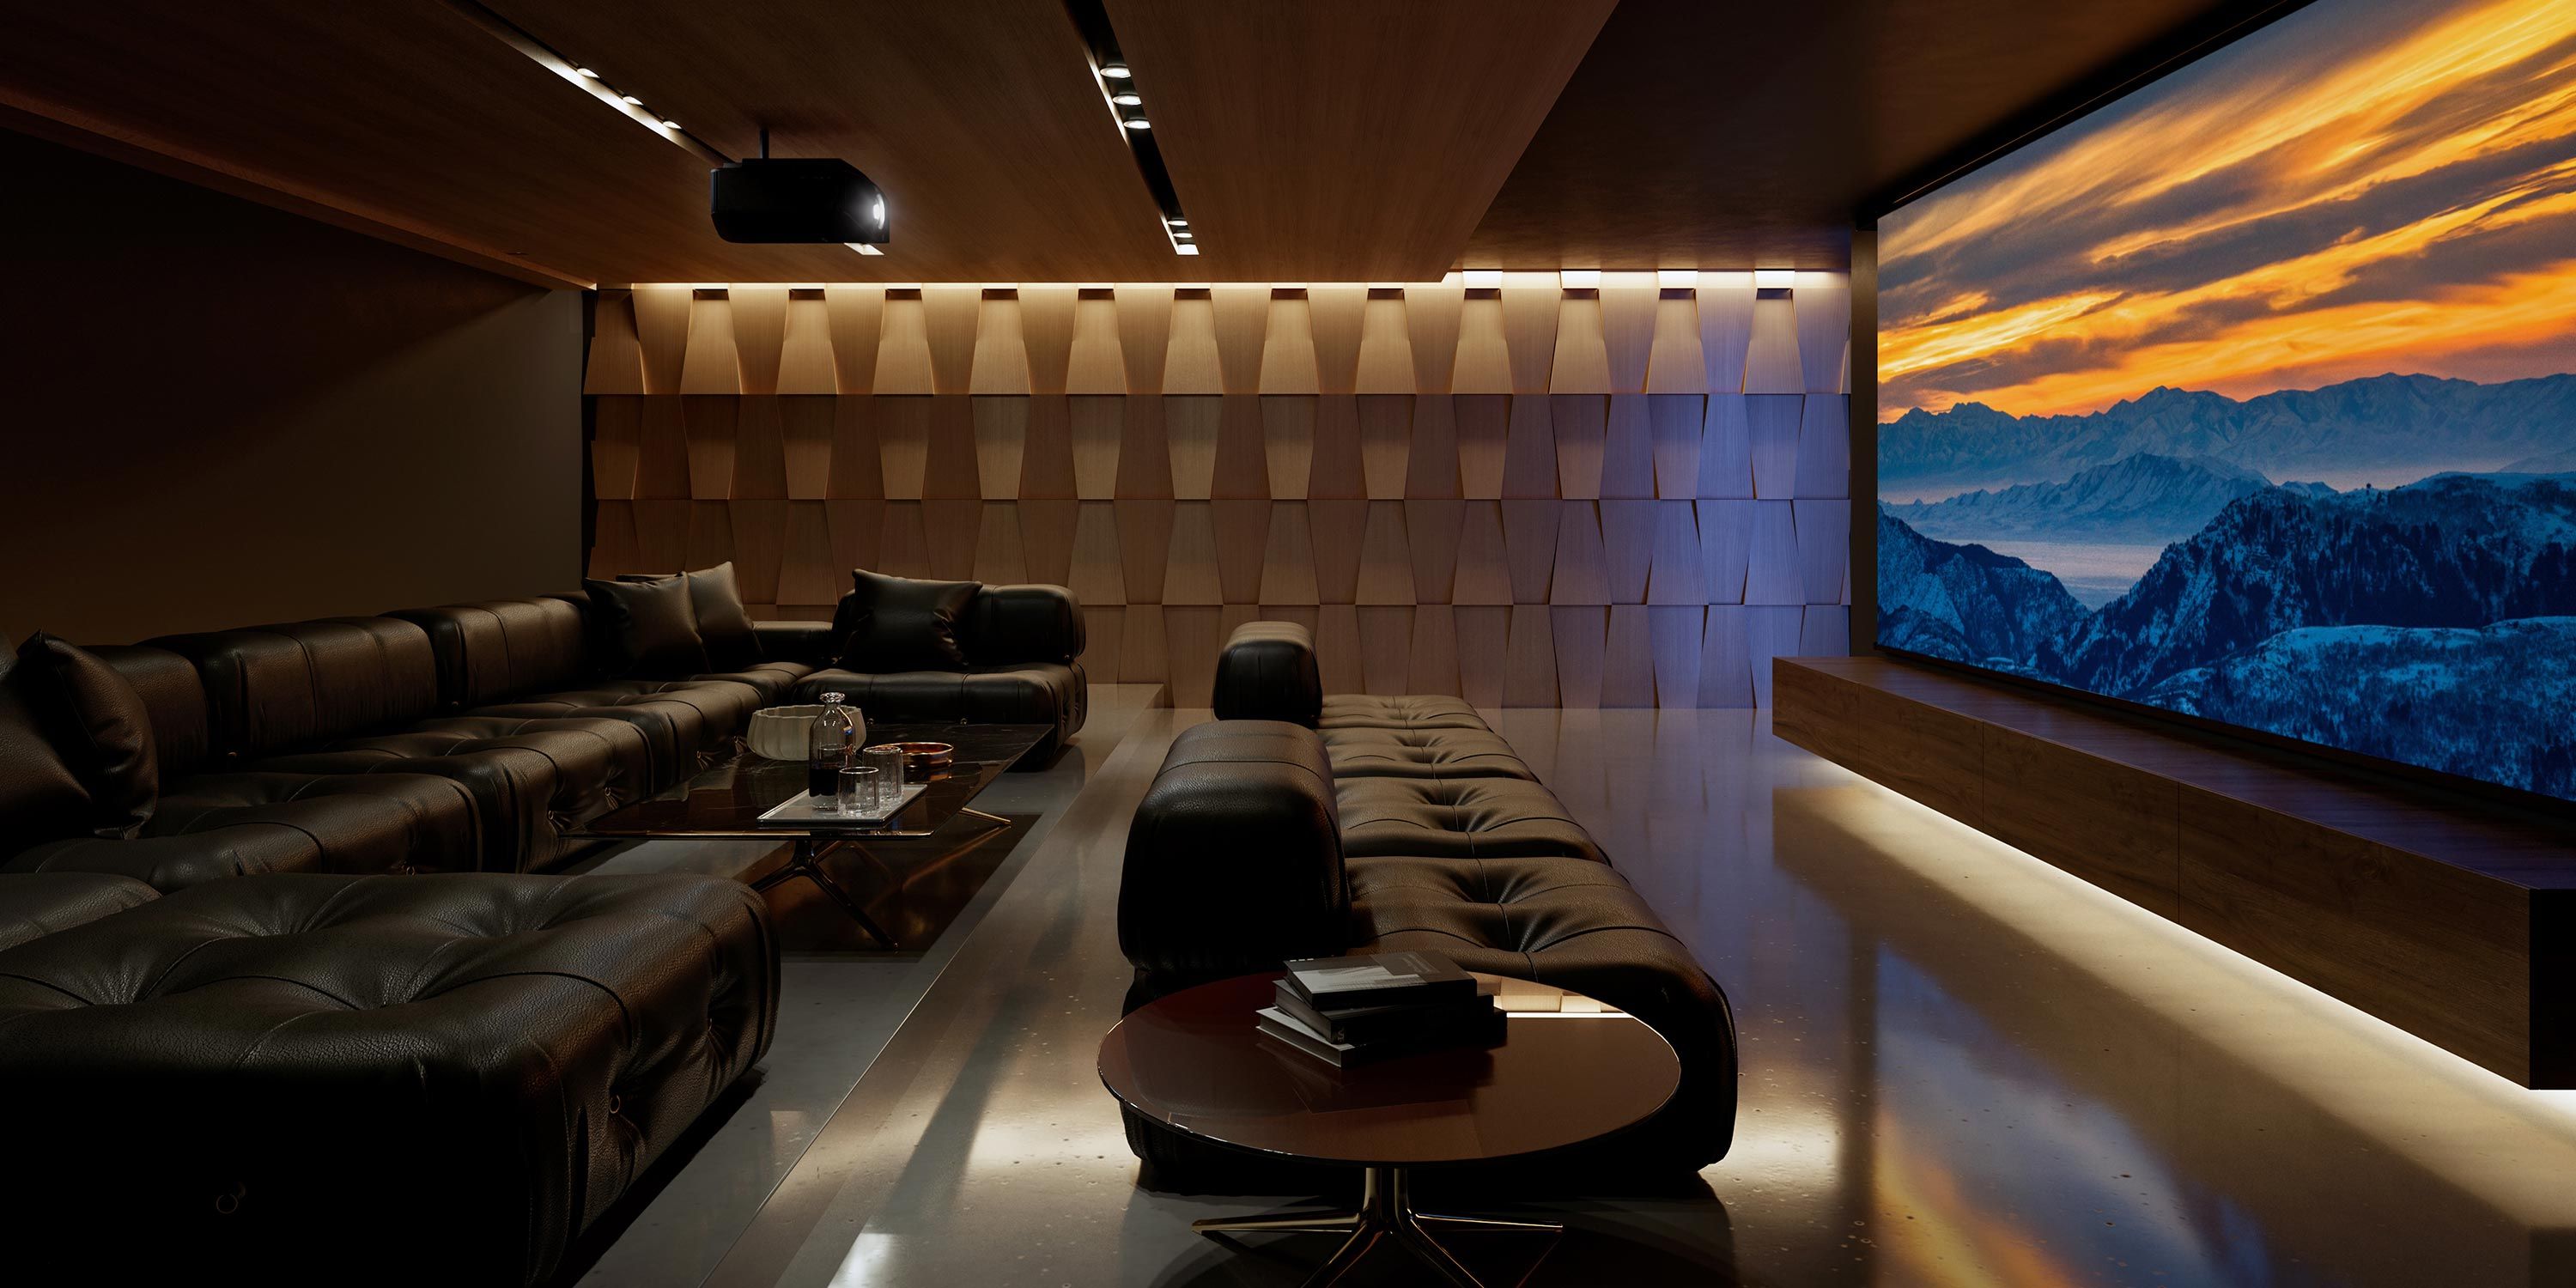 sony home theater with black seating and sunset scene on screen